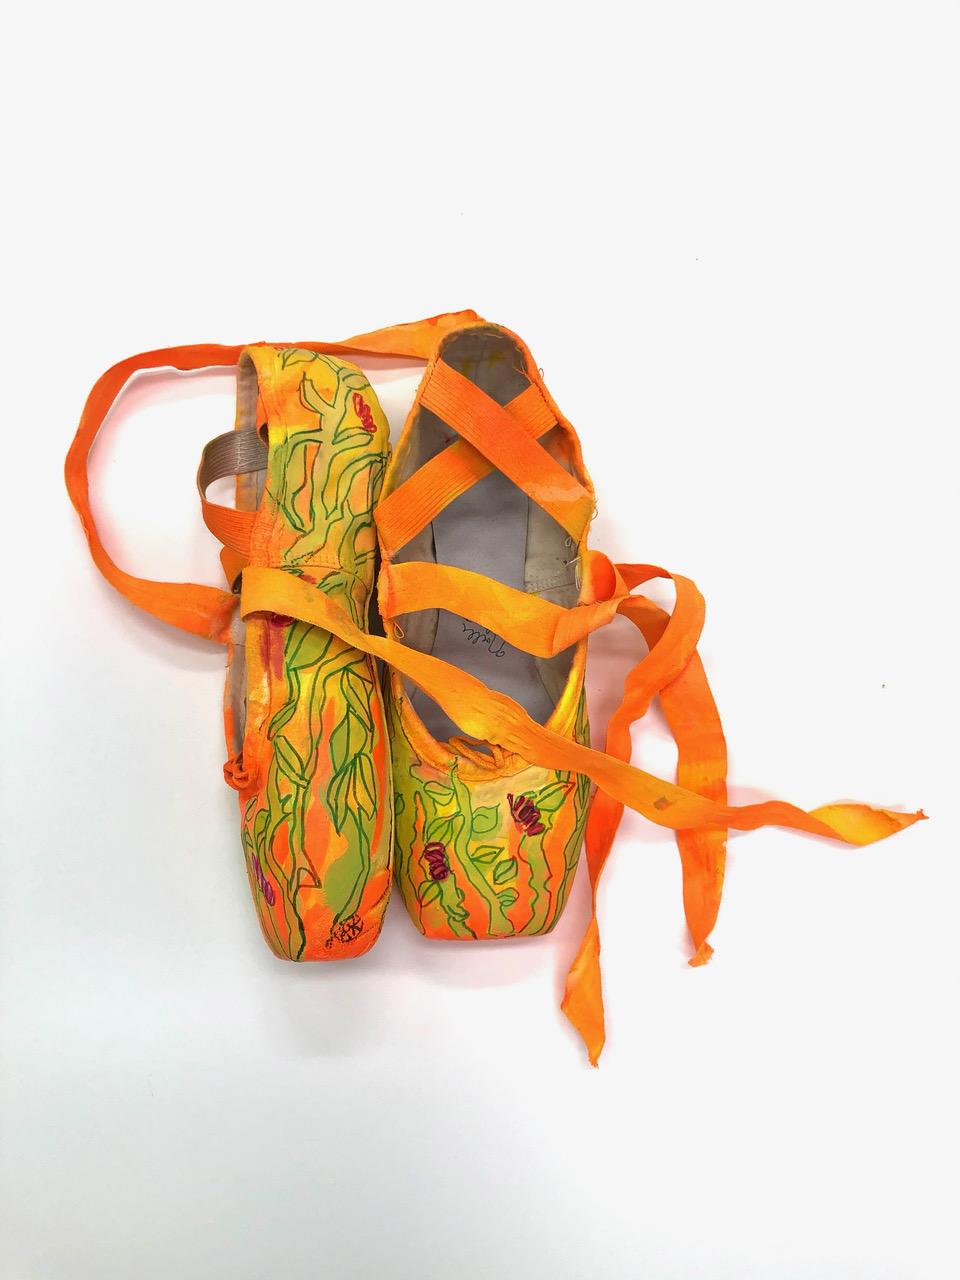 Rachelle Krieger Still-Life Sculpture - The Rite of Spring, orange and green flashe on ballet shoes, mixed media 